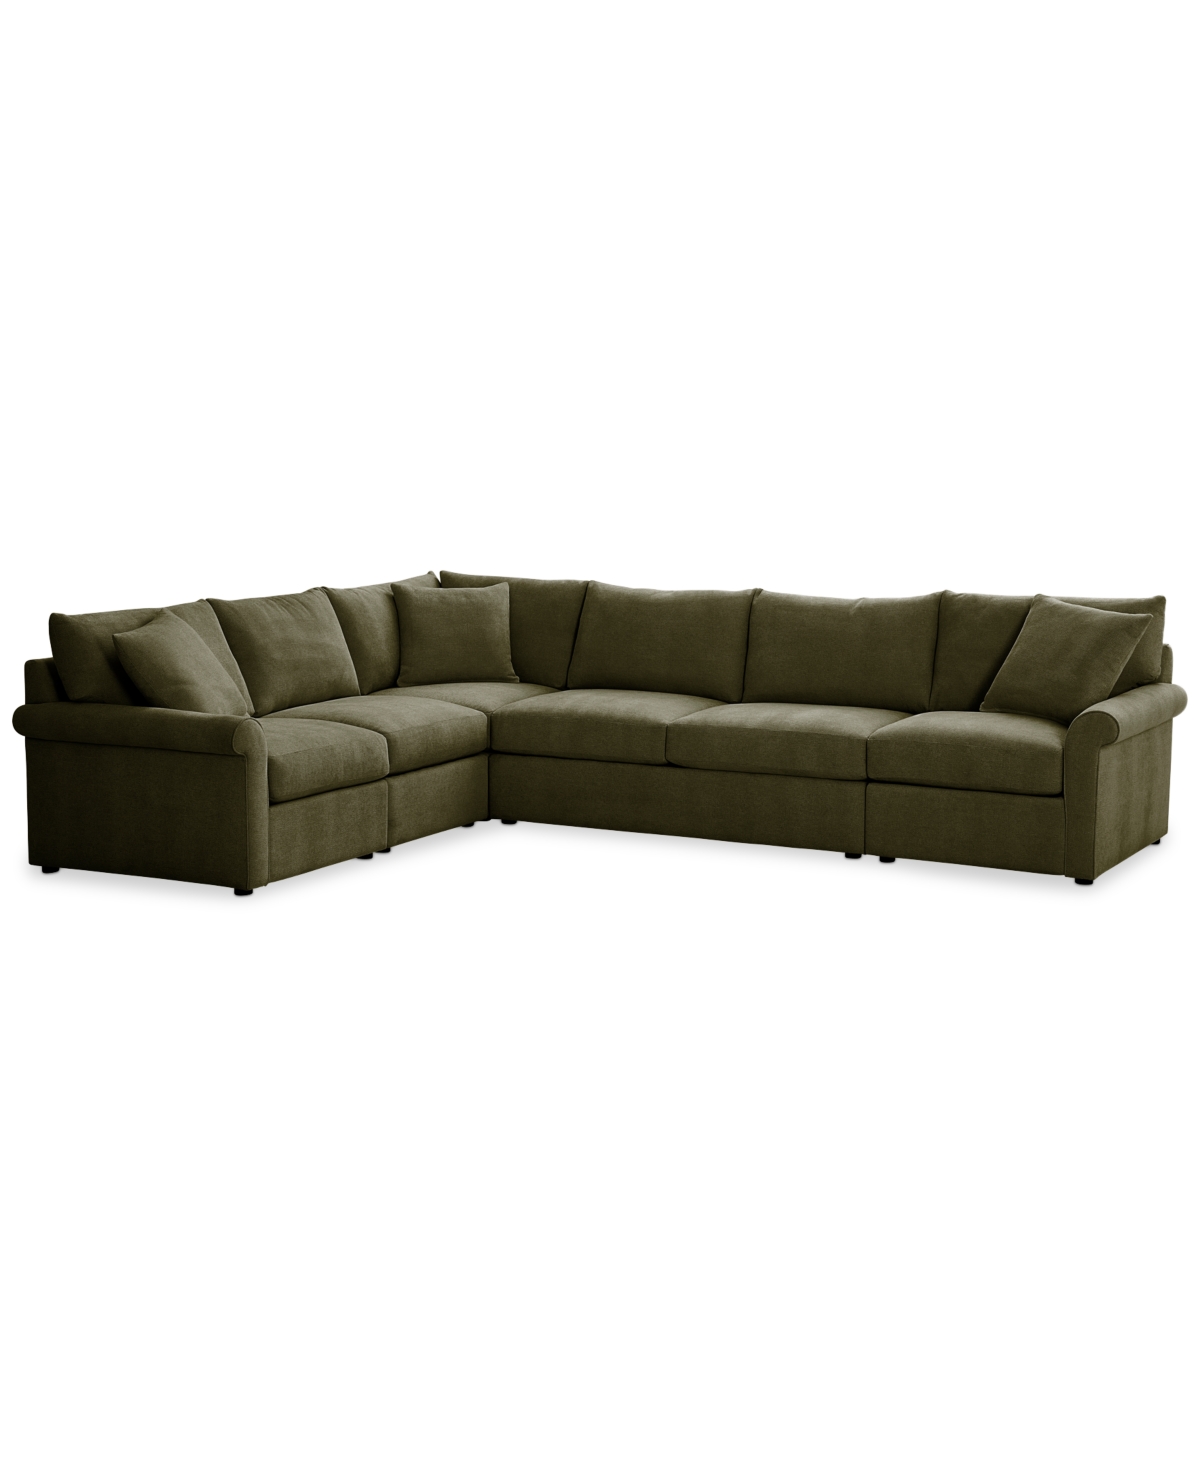 Furniture Wrenley 137" 5-pc. Fabric L-shape Modular Sleeper Sectional Sofa, Created For Macy's In Olive